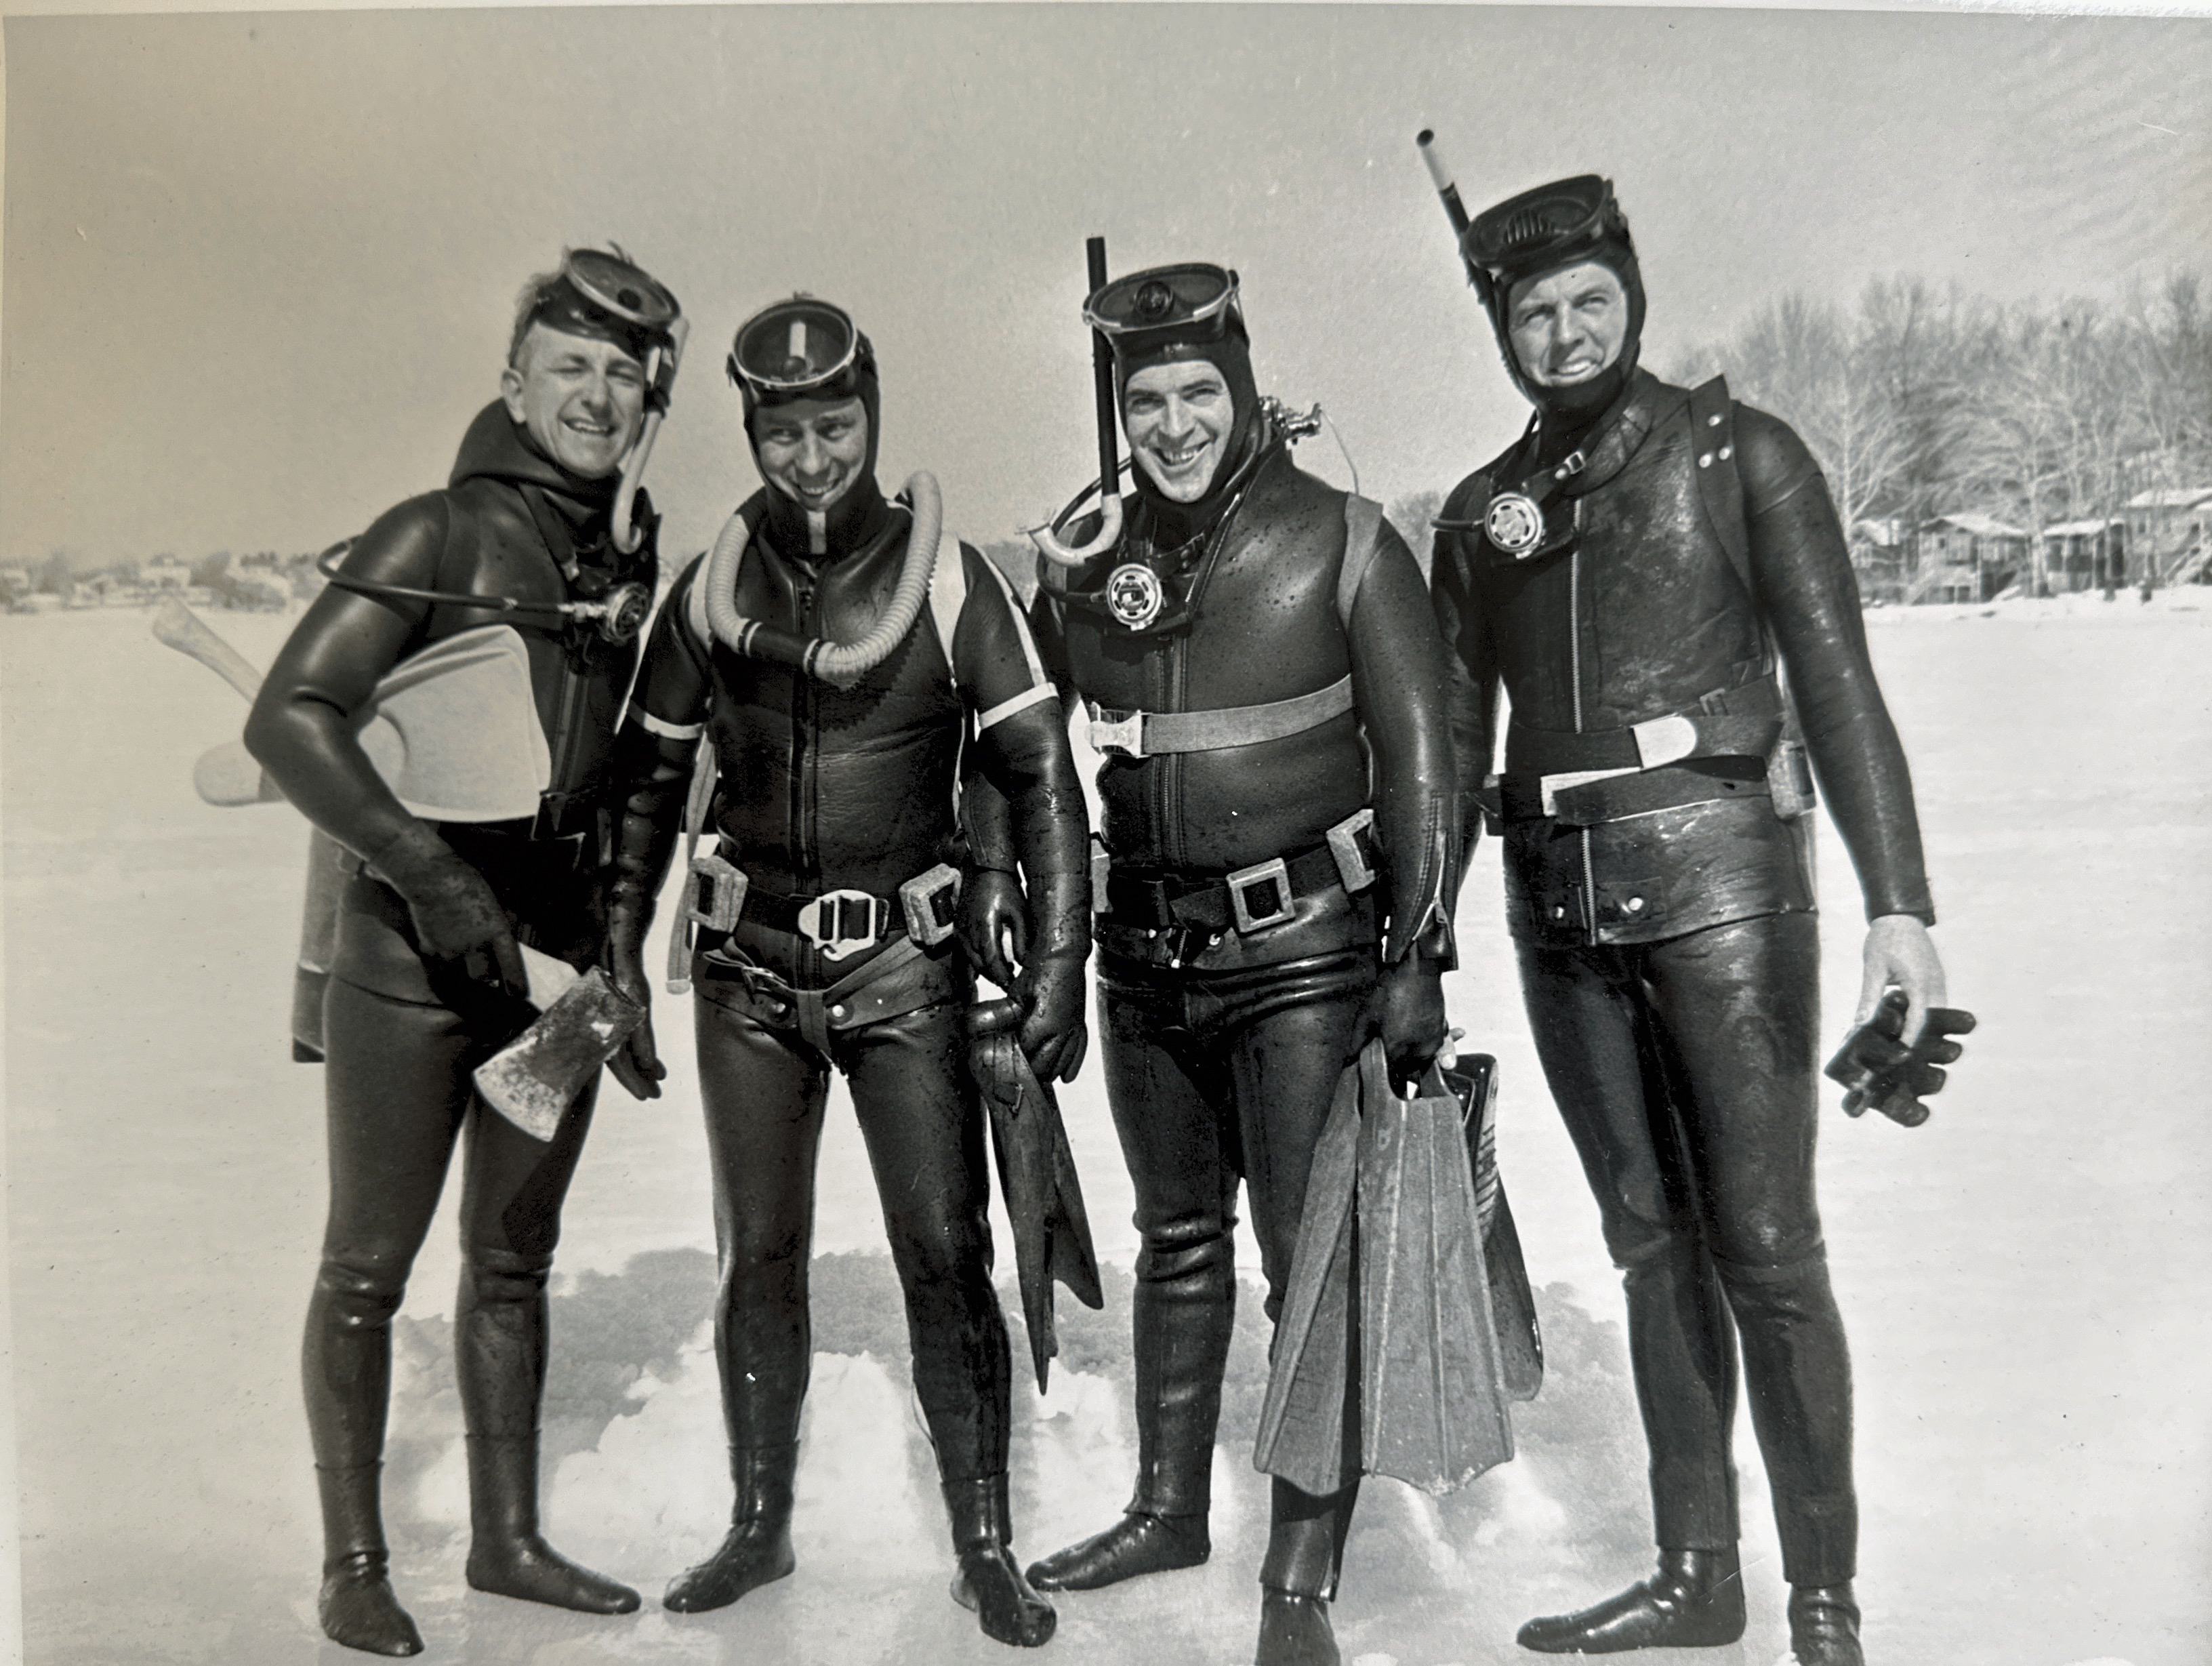 South Shore Skin Divers Club, Whitman’s Pond, Weymouth, MA. February 1966, 16“ of ice.
(Left to Right - D. Layton, B. Olson (President), B. Atran, Cliff Theriault)